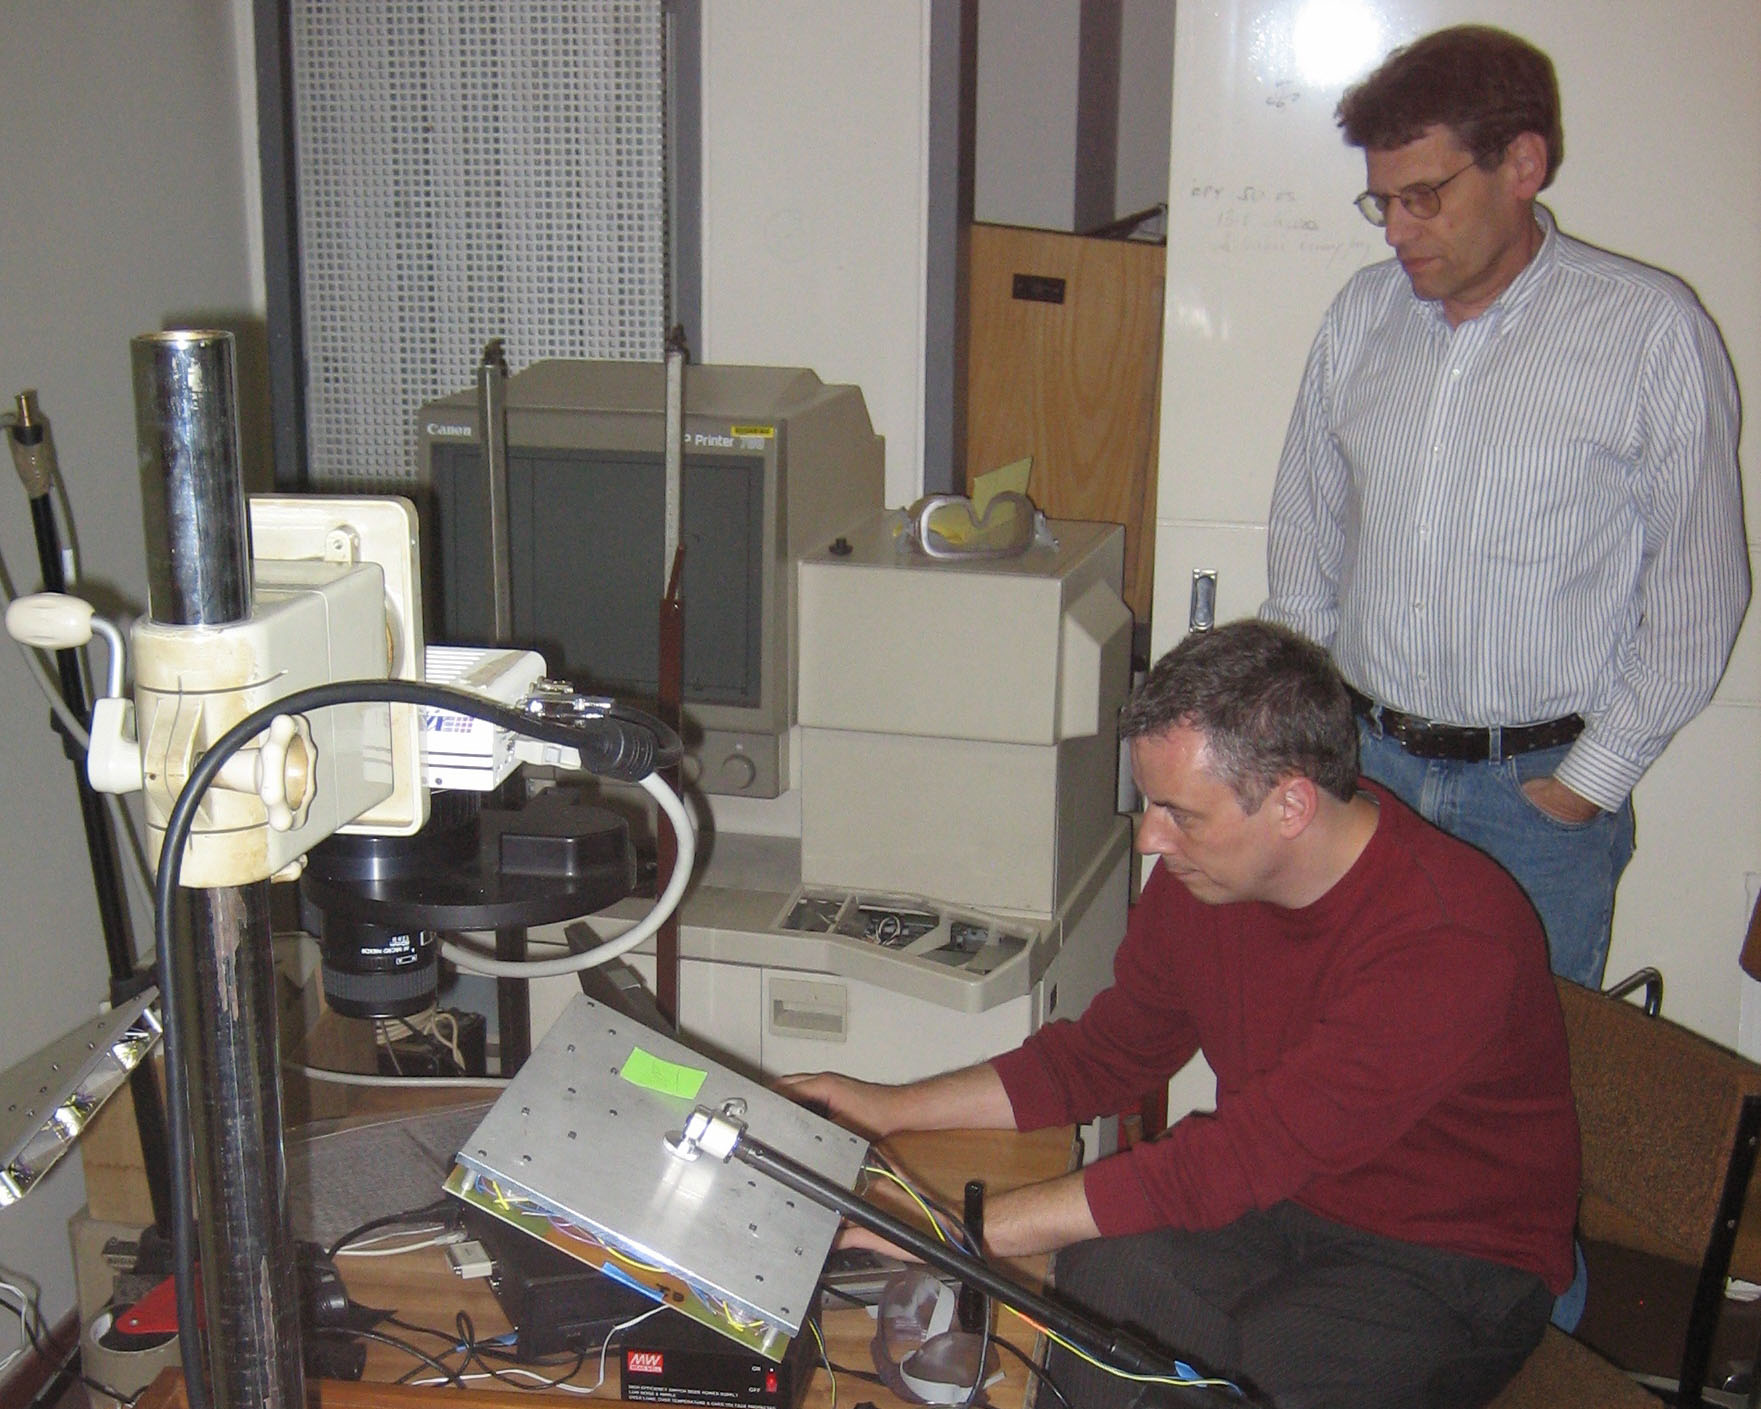 Doug Emery and Roger L. Easton, Jr. review spectral image data of the 1871 Field Diary, 2010-2011. Copyright Livingstone Spectral Imaging Project team. Creative Commons Attribution-NonCommercial 3.0 Unported (https://creativecommons.org/licenses/by-nc/3.0/).